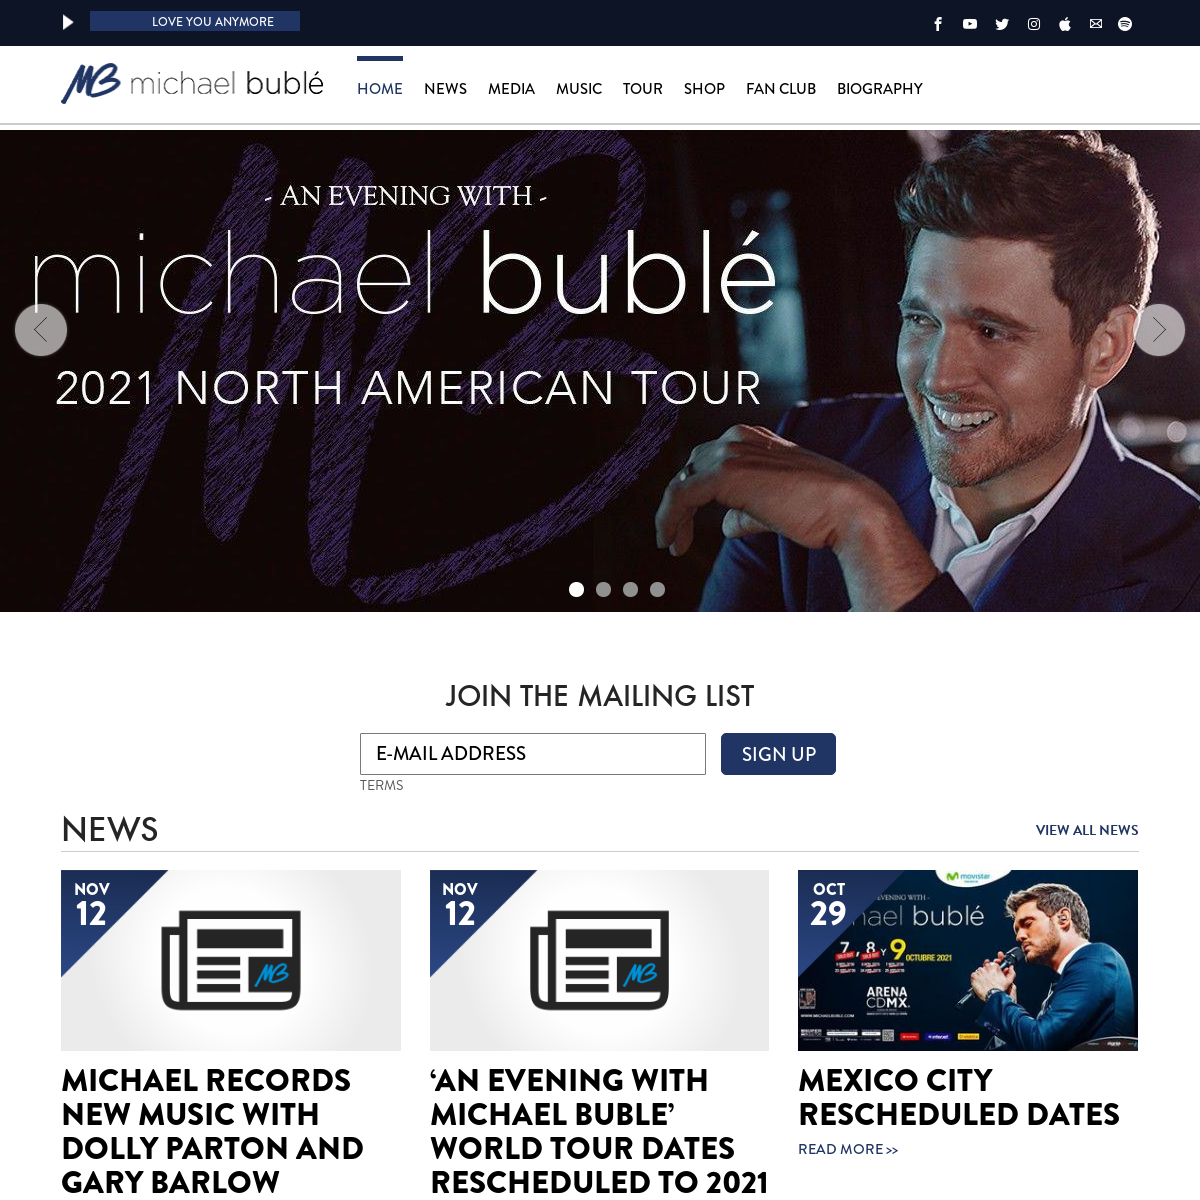 A complete backup of michaelbuble.com